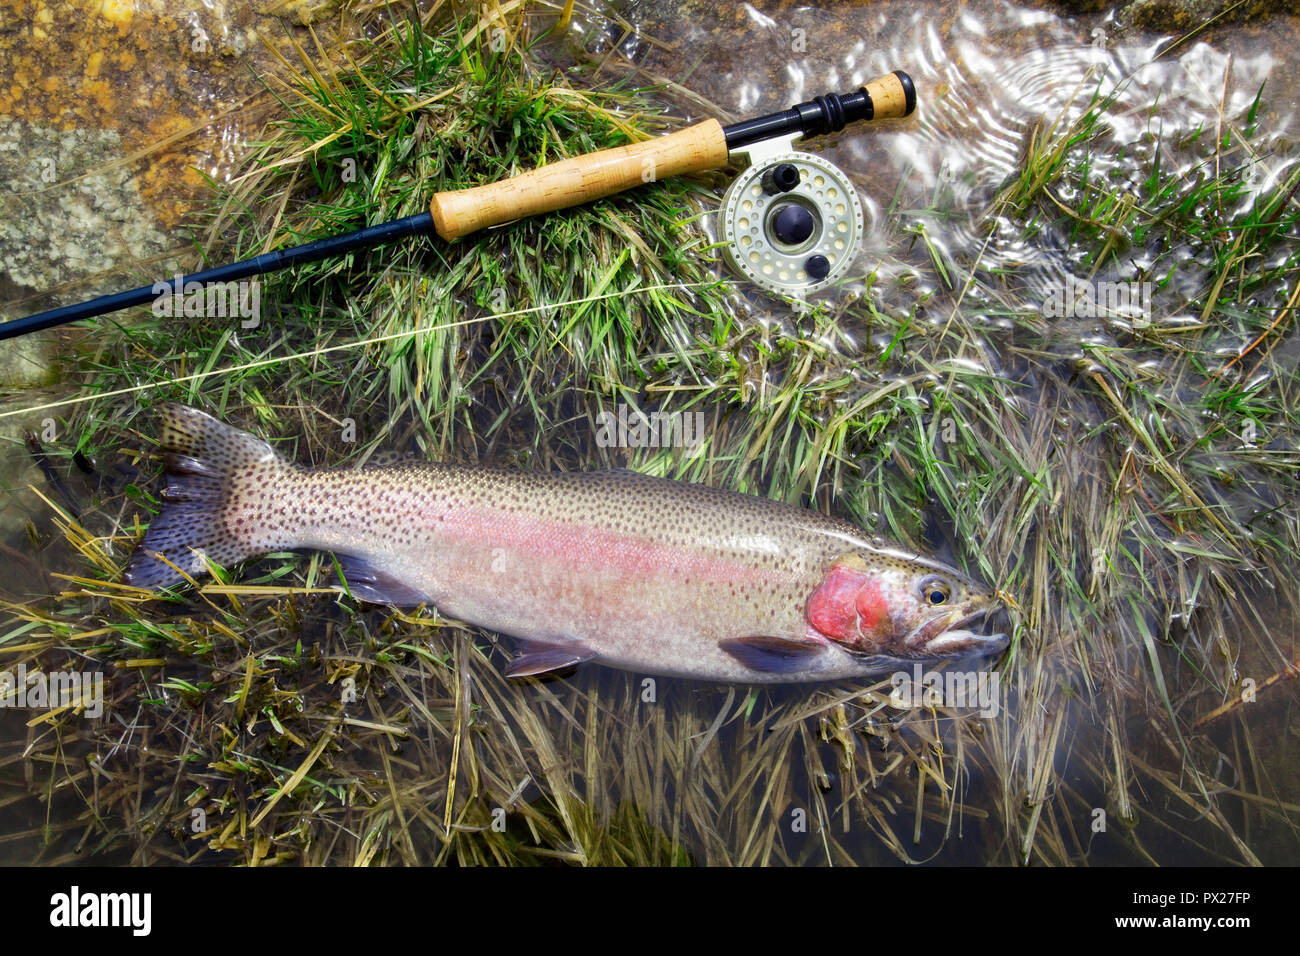 Rainbow trout caught while fly fishing. Stock Photo